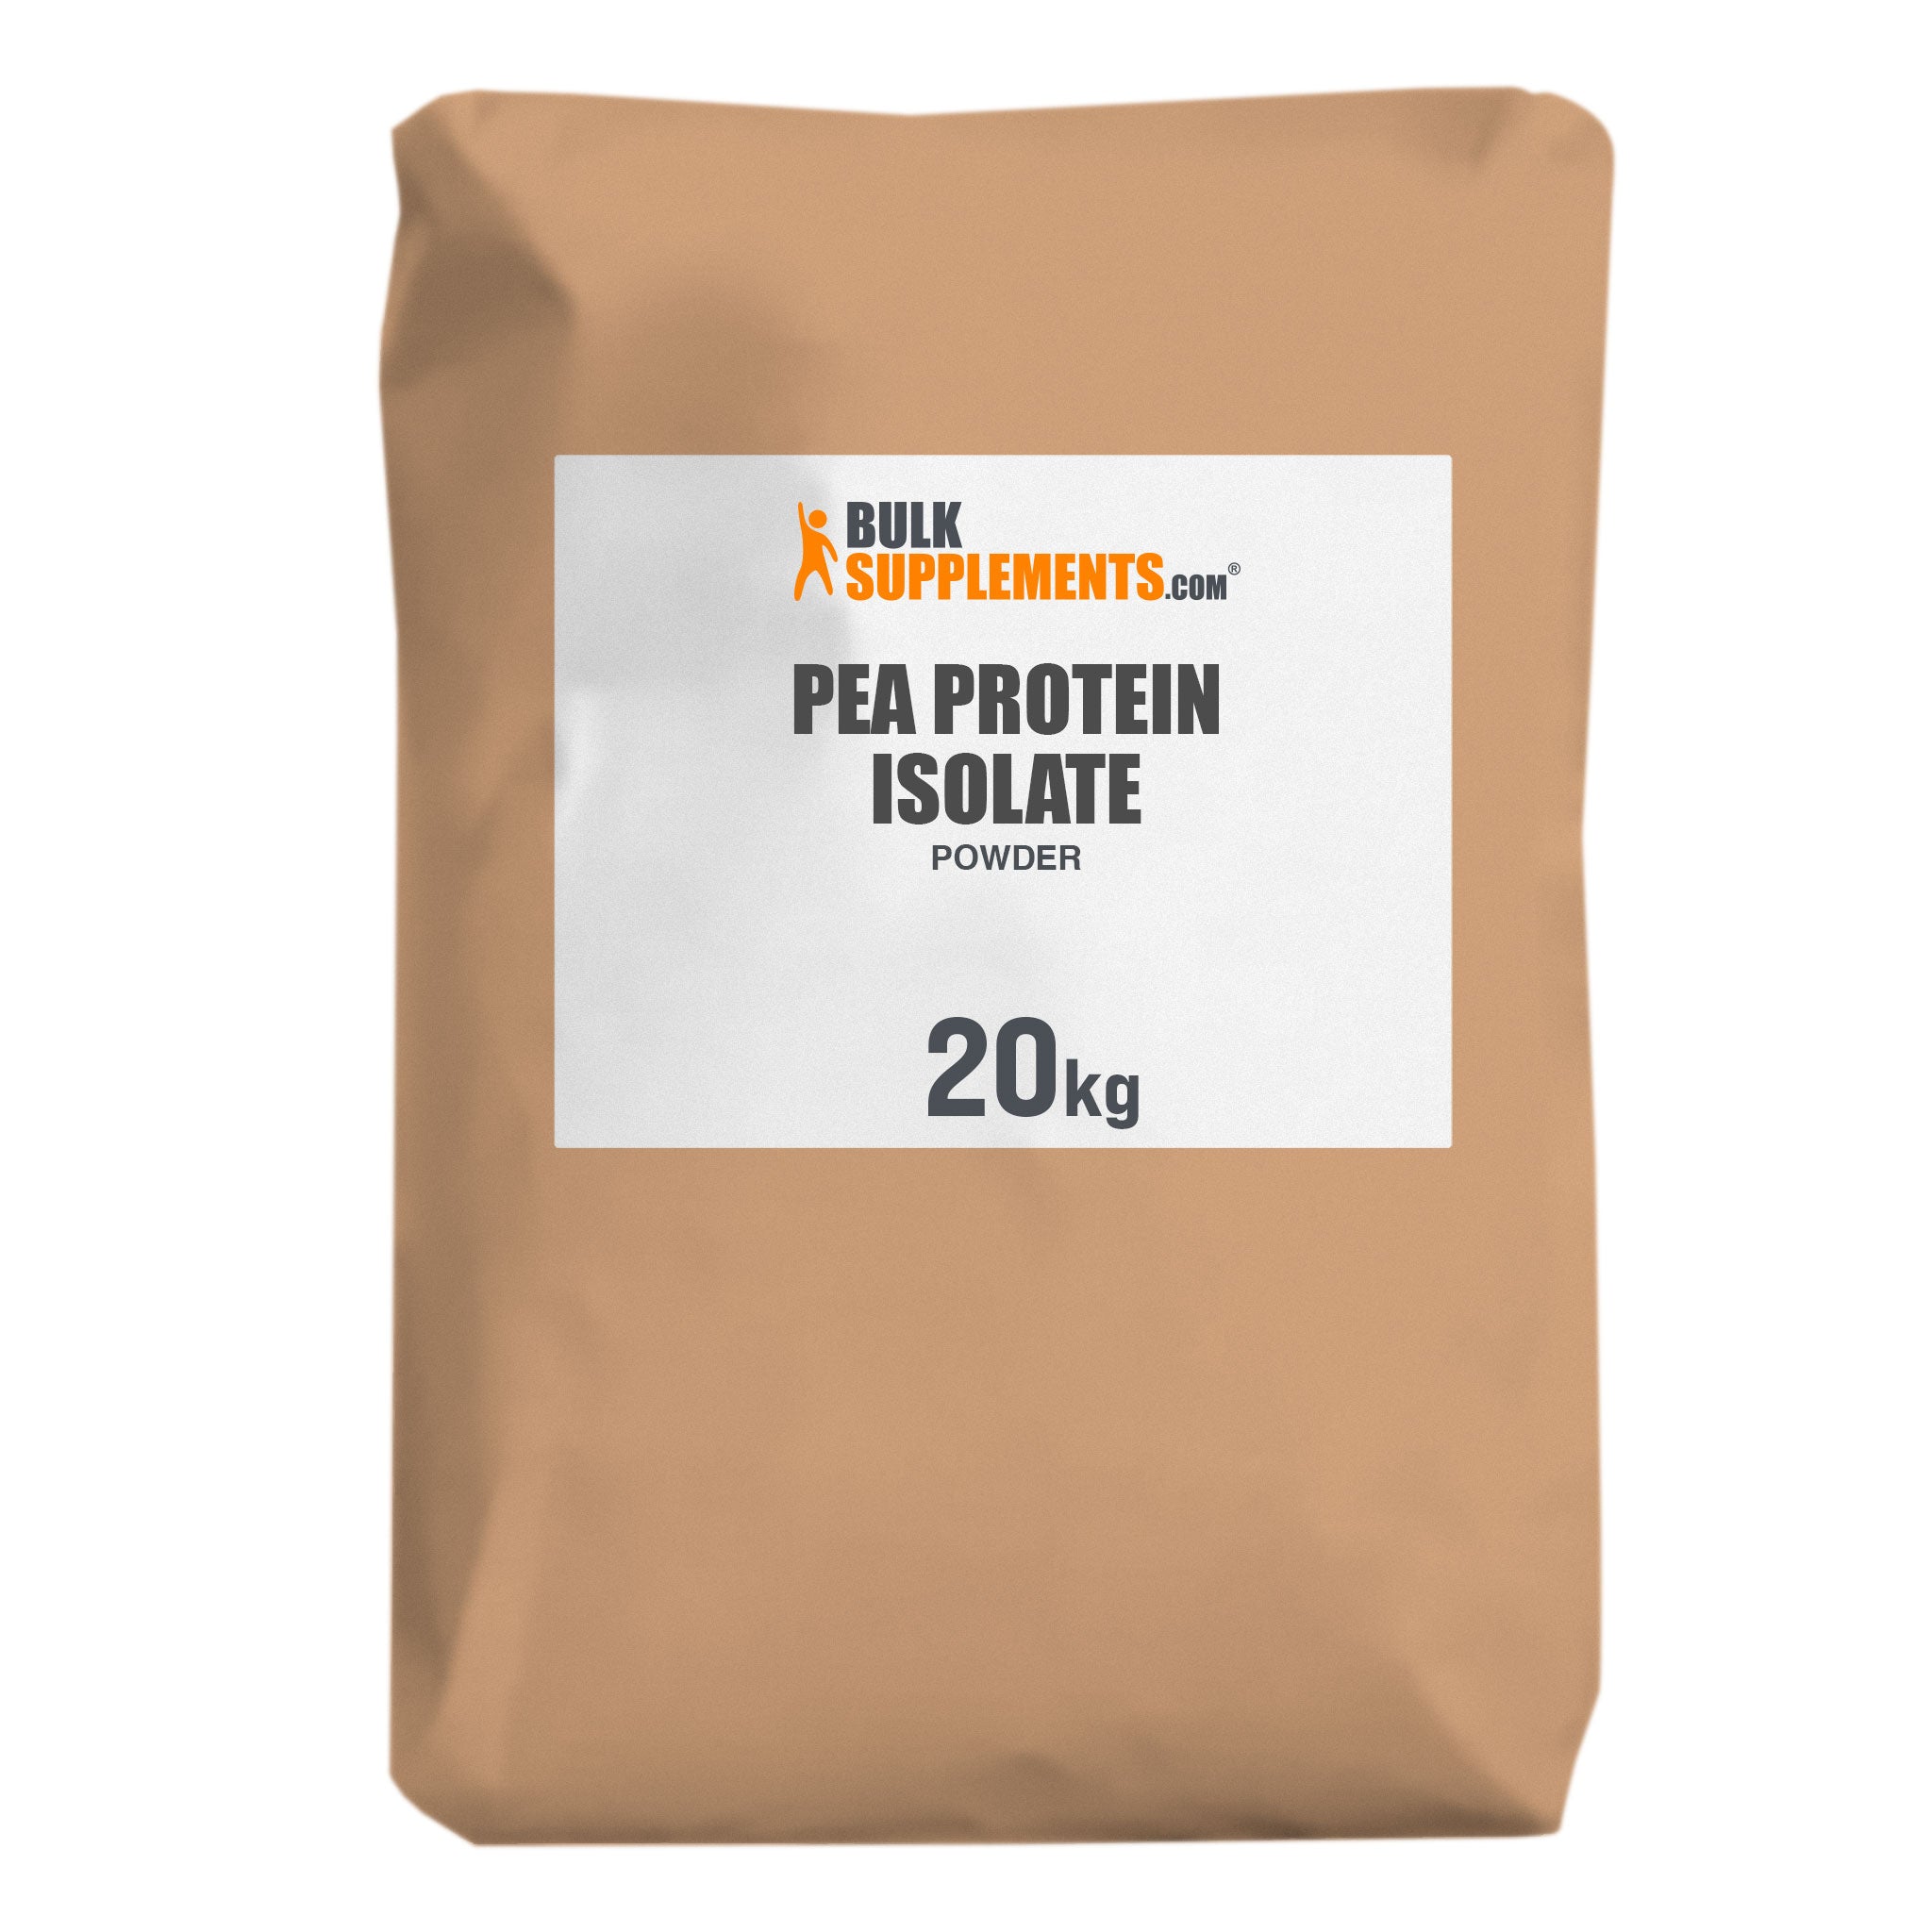 BulkSupplements Pea Protein Isolate Powder 20kg bag